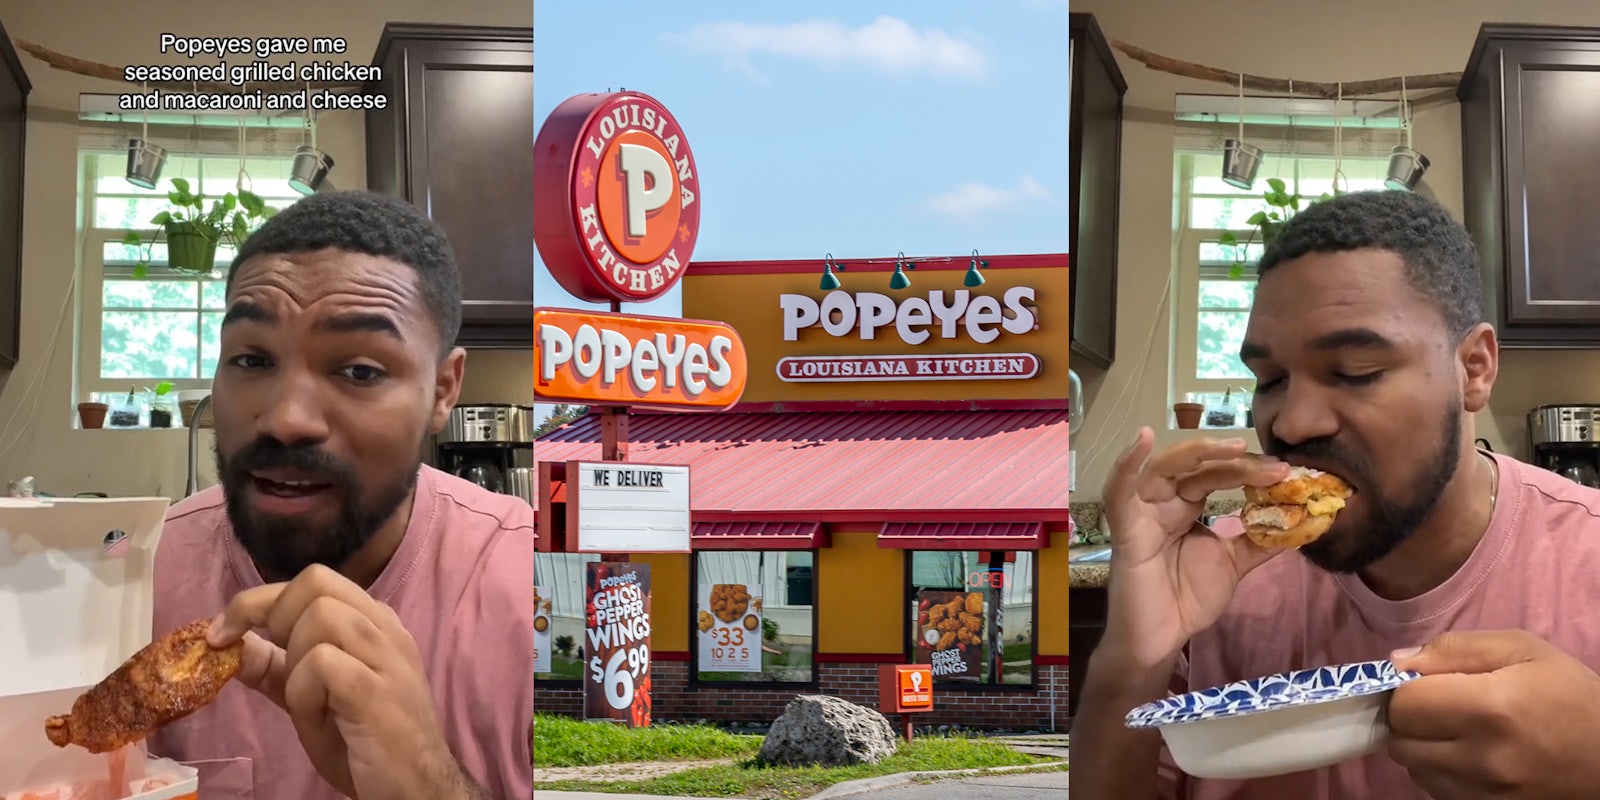 Popeyes customer with caption 'Popeyes gave me seasoned grilled chicken and macaroni and cheese' (l) Popeyes restaurant with signs (c) Popeyes customer eating strawberry biscuit hack (r)